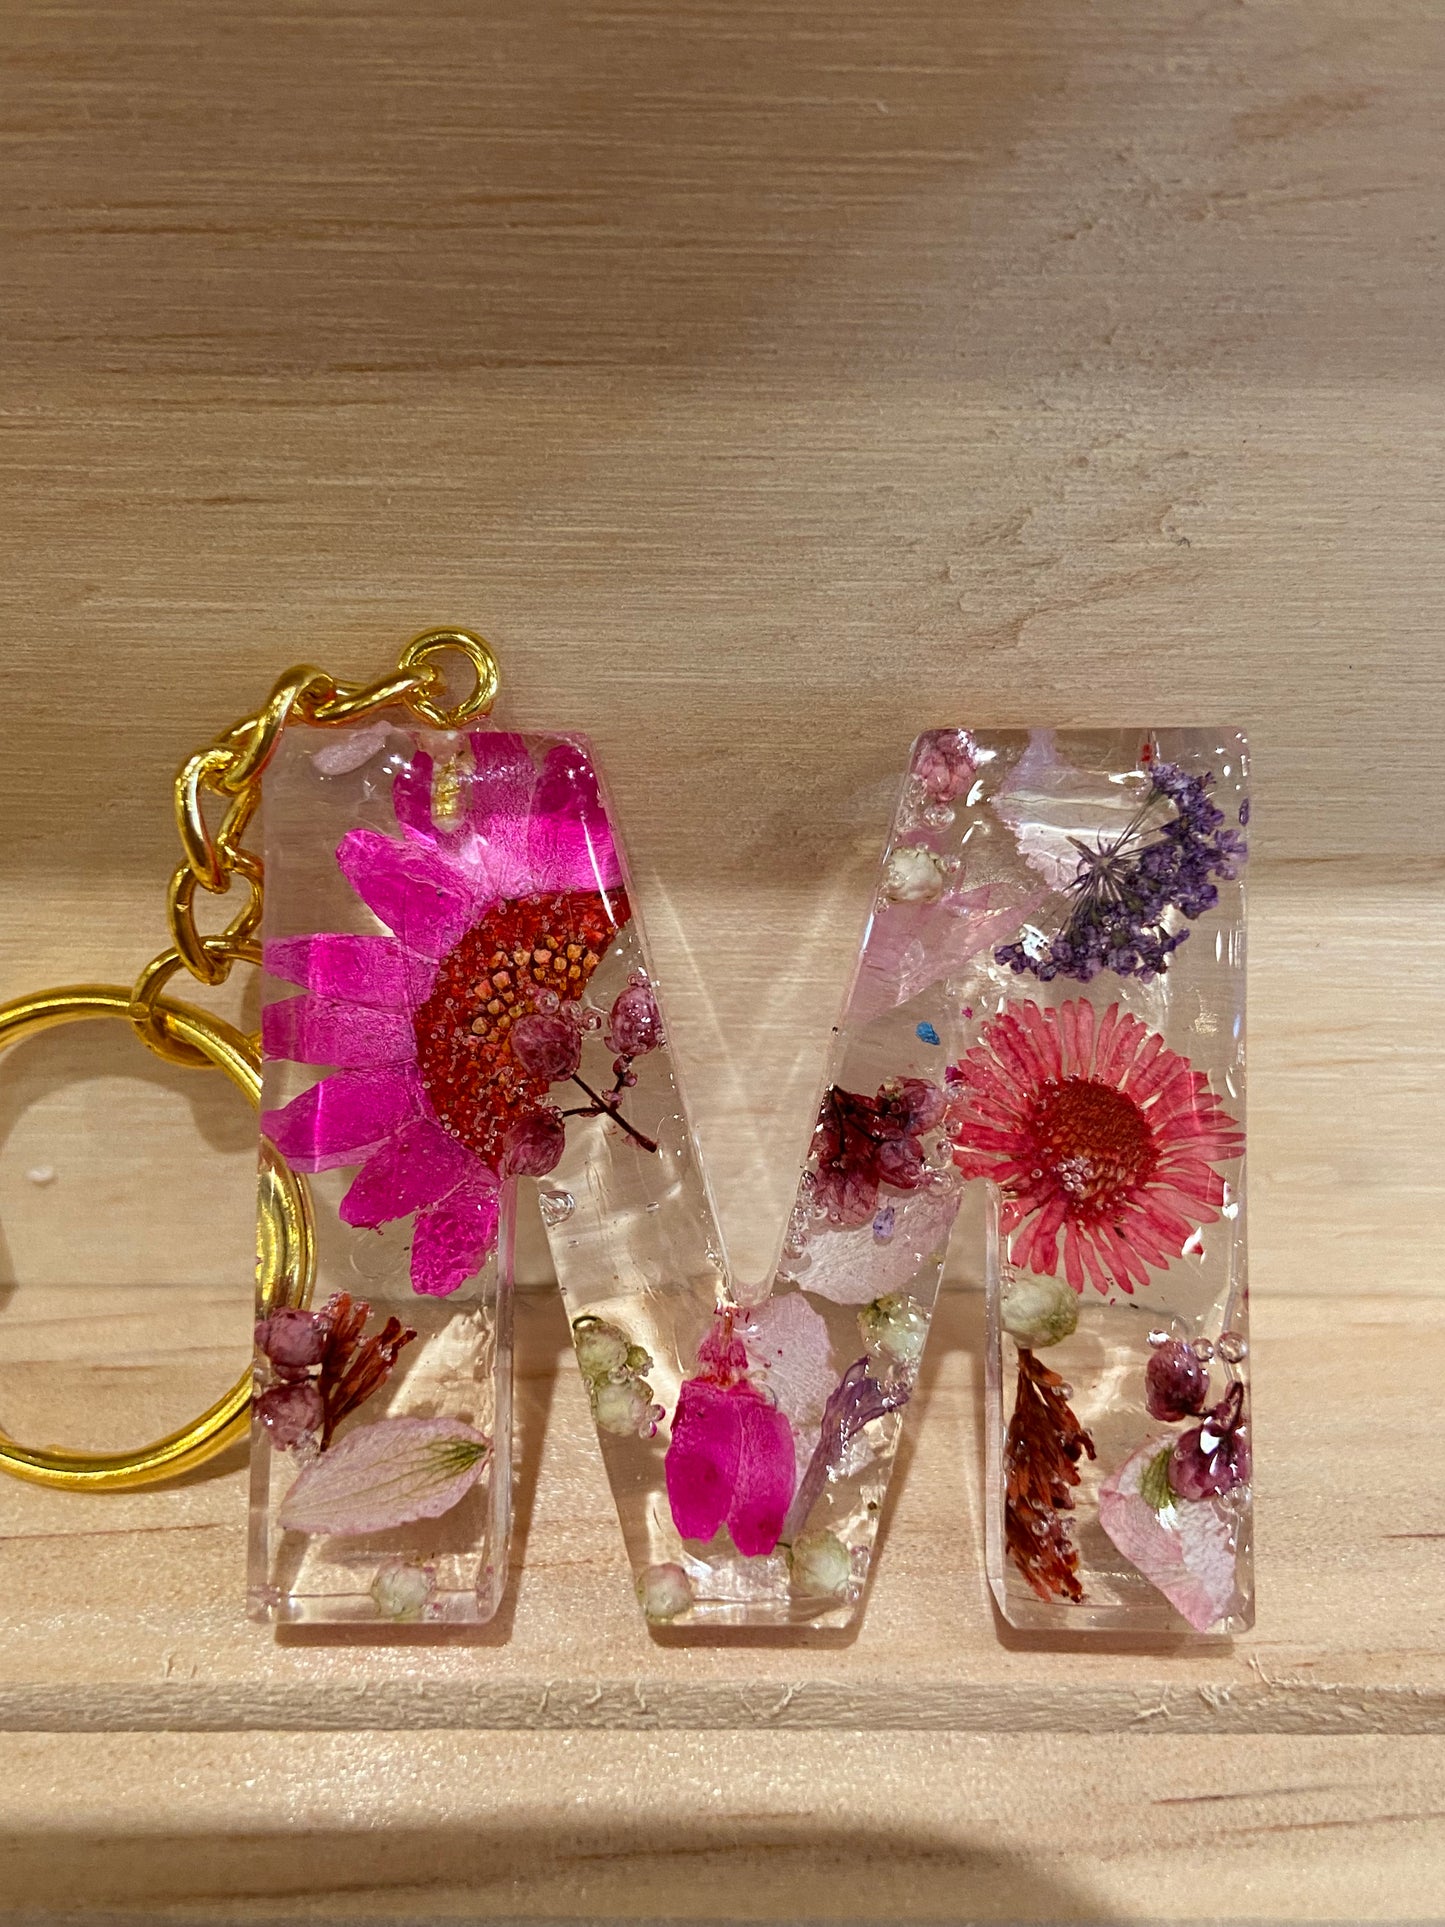 Letter Keychains